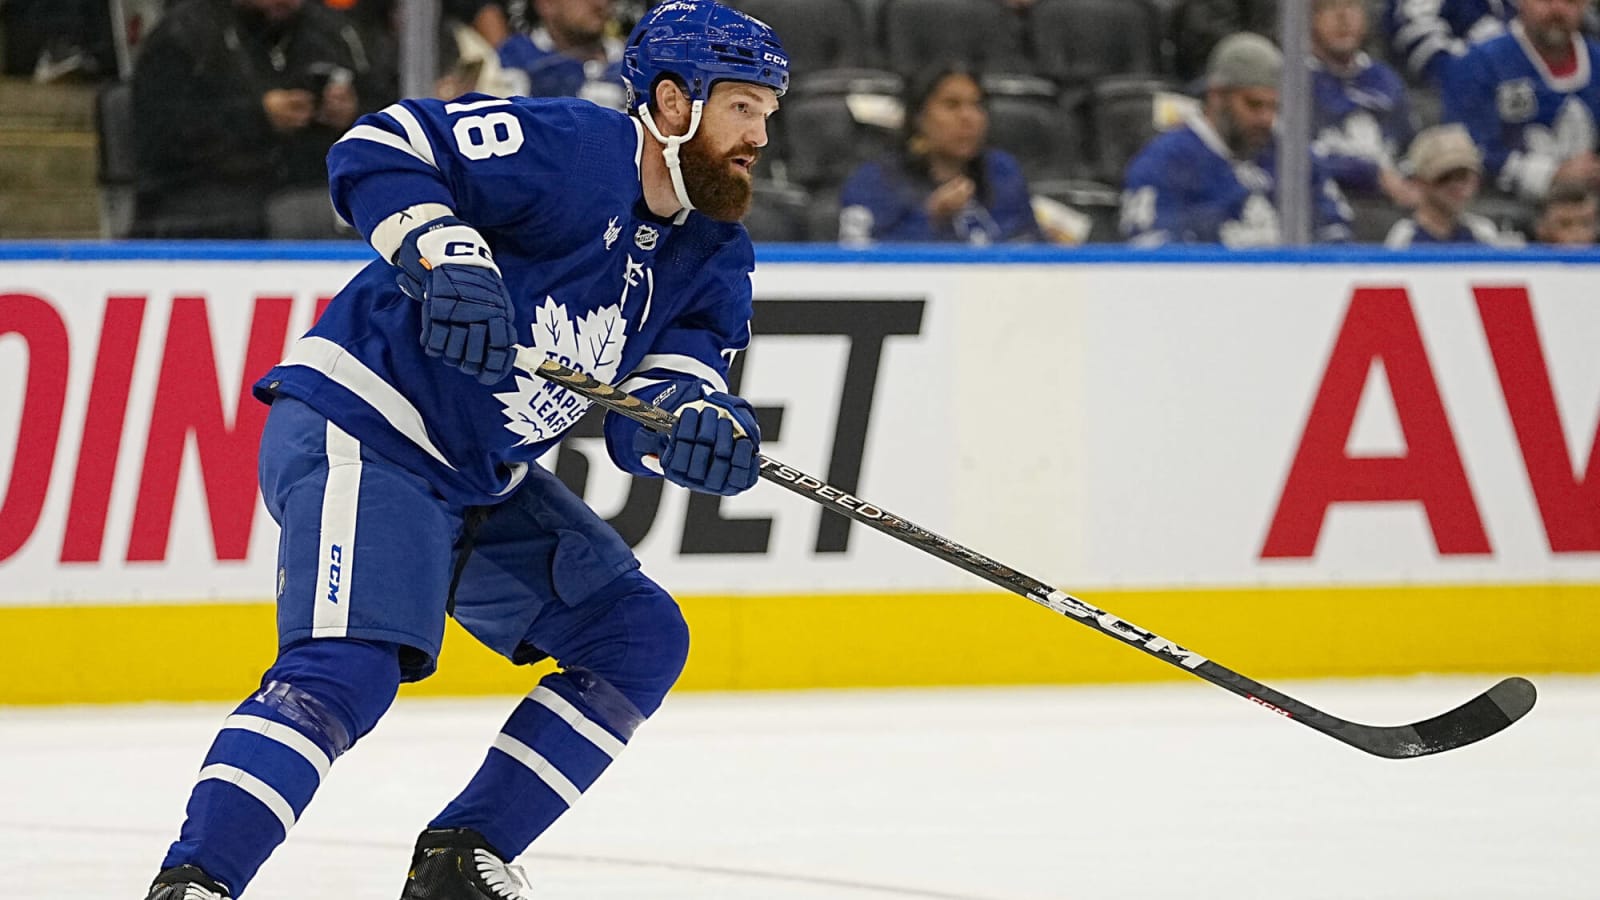 Leafs Injury Report: Benn out minimum three weeks, Dahlstrom out long-term